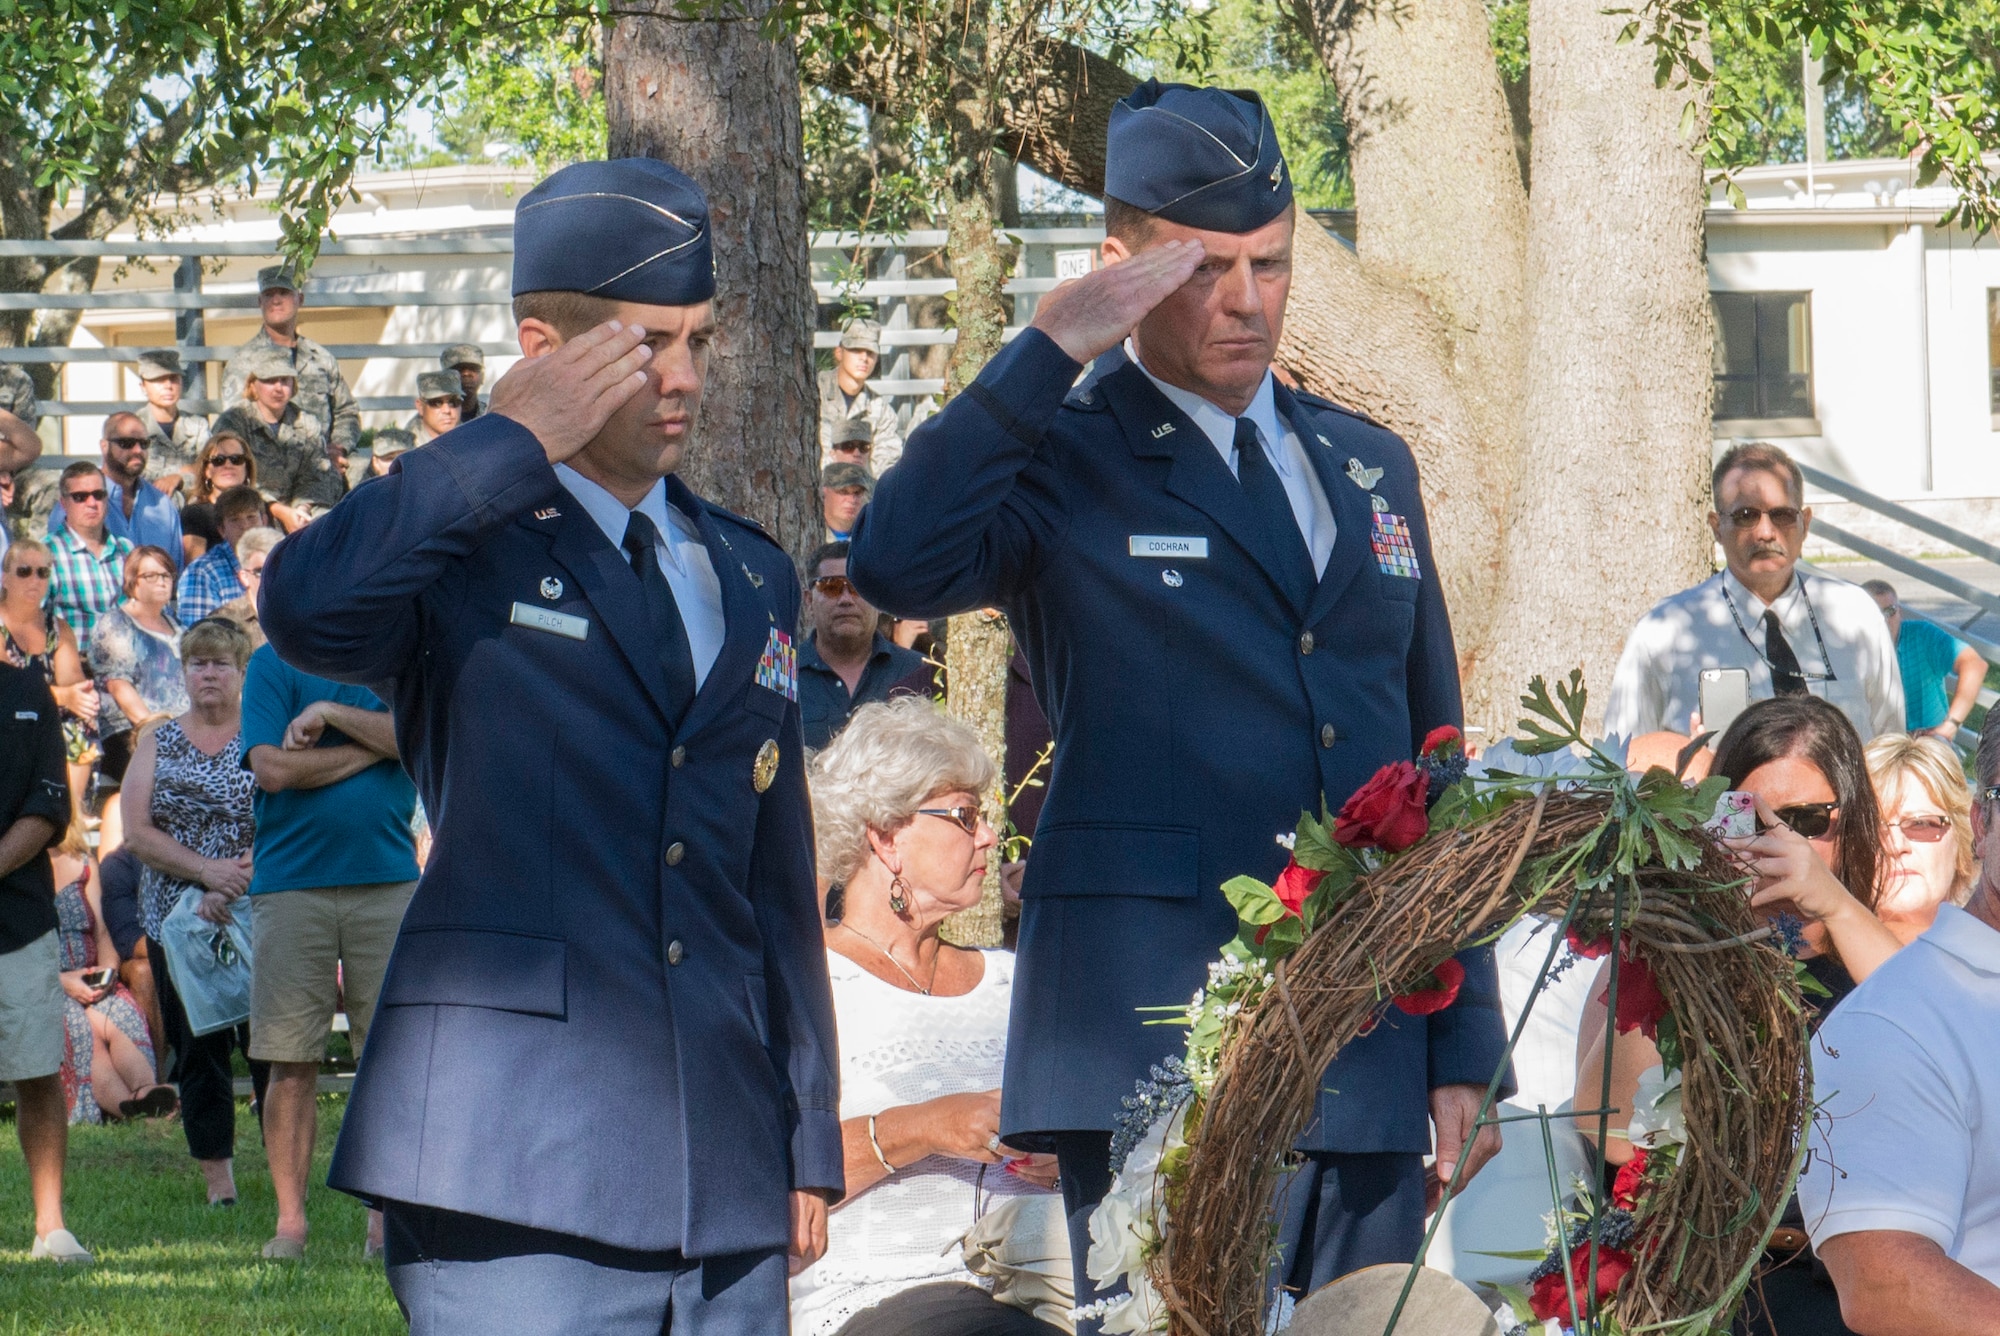 Col. Lance Pilch, 33rd Fighter Wing commander, and retired Col. Doug Cochran, commander of the 58th Tactical Fighter Squadron at the time of the Khobar Towers bombing, salute the Khobar Towers Memorial Ceremony wreath June 24, 2016, at Eglin Air Force Base, Fla. The 33rd FW hosted a ceremony commemorating the 20th anniversary of the Khobar Towers terrorist attack to honor the 19 Airmen who lost their lives, 12 of which were Nomads, and pay tribute to the families and survivors. (U.S. Air Force photo by Senior Airman Stormy Archer/Released)